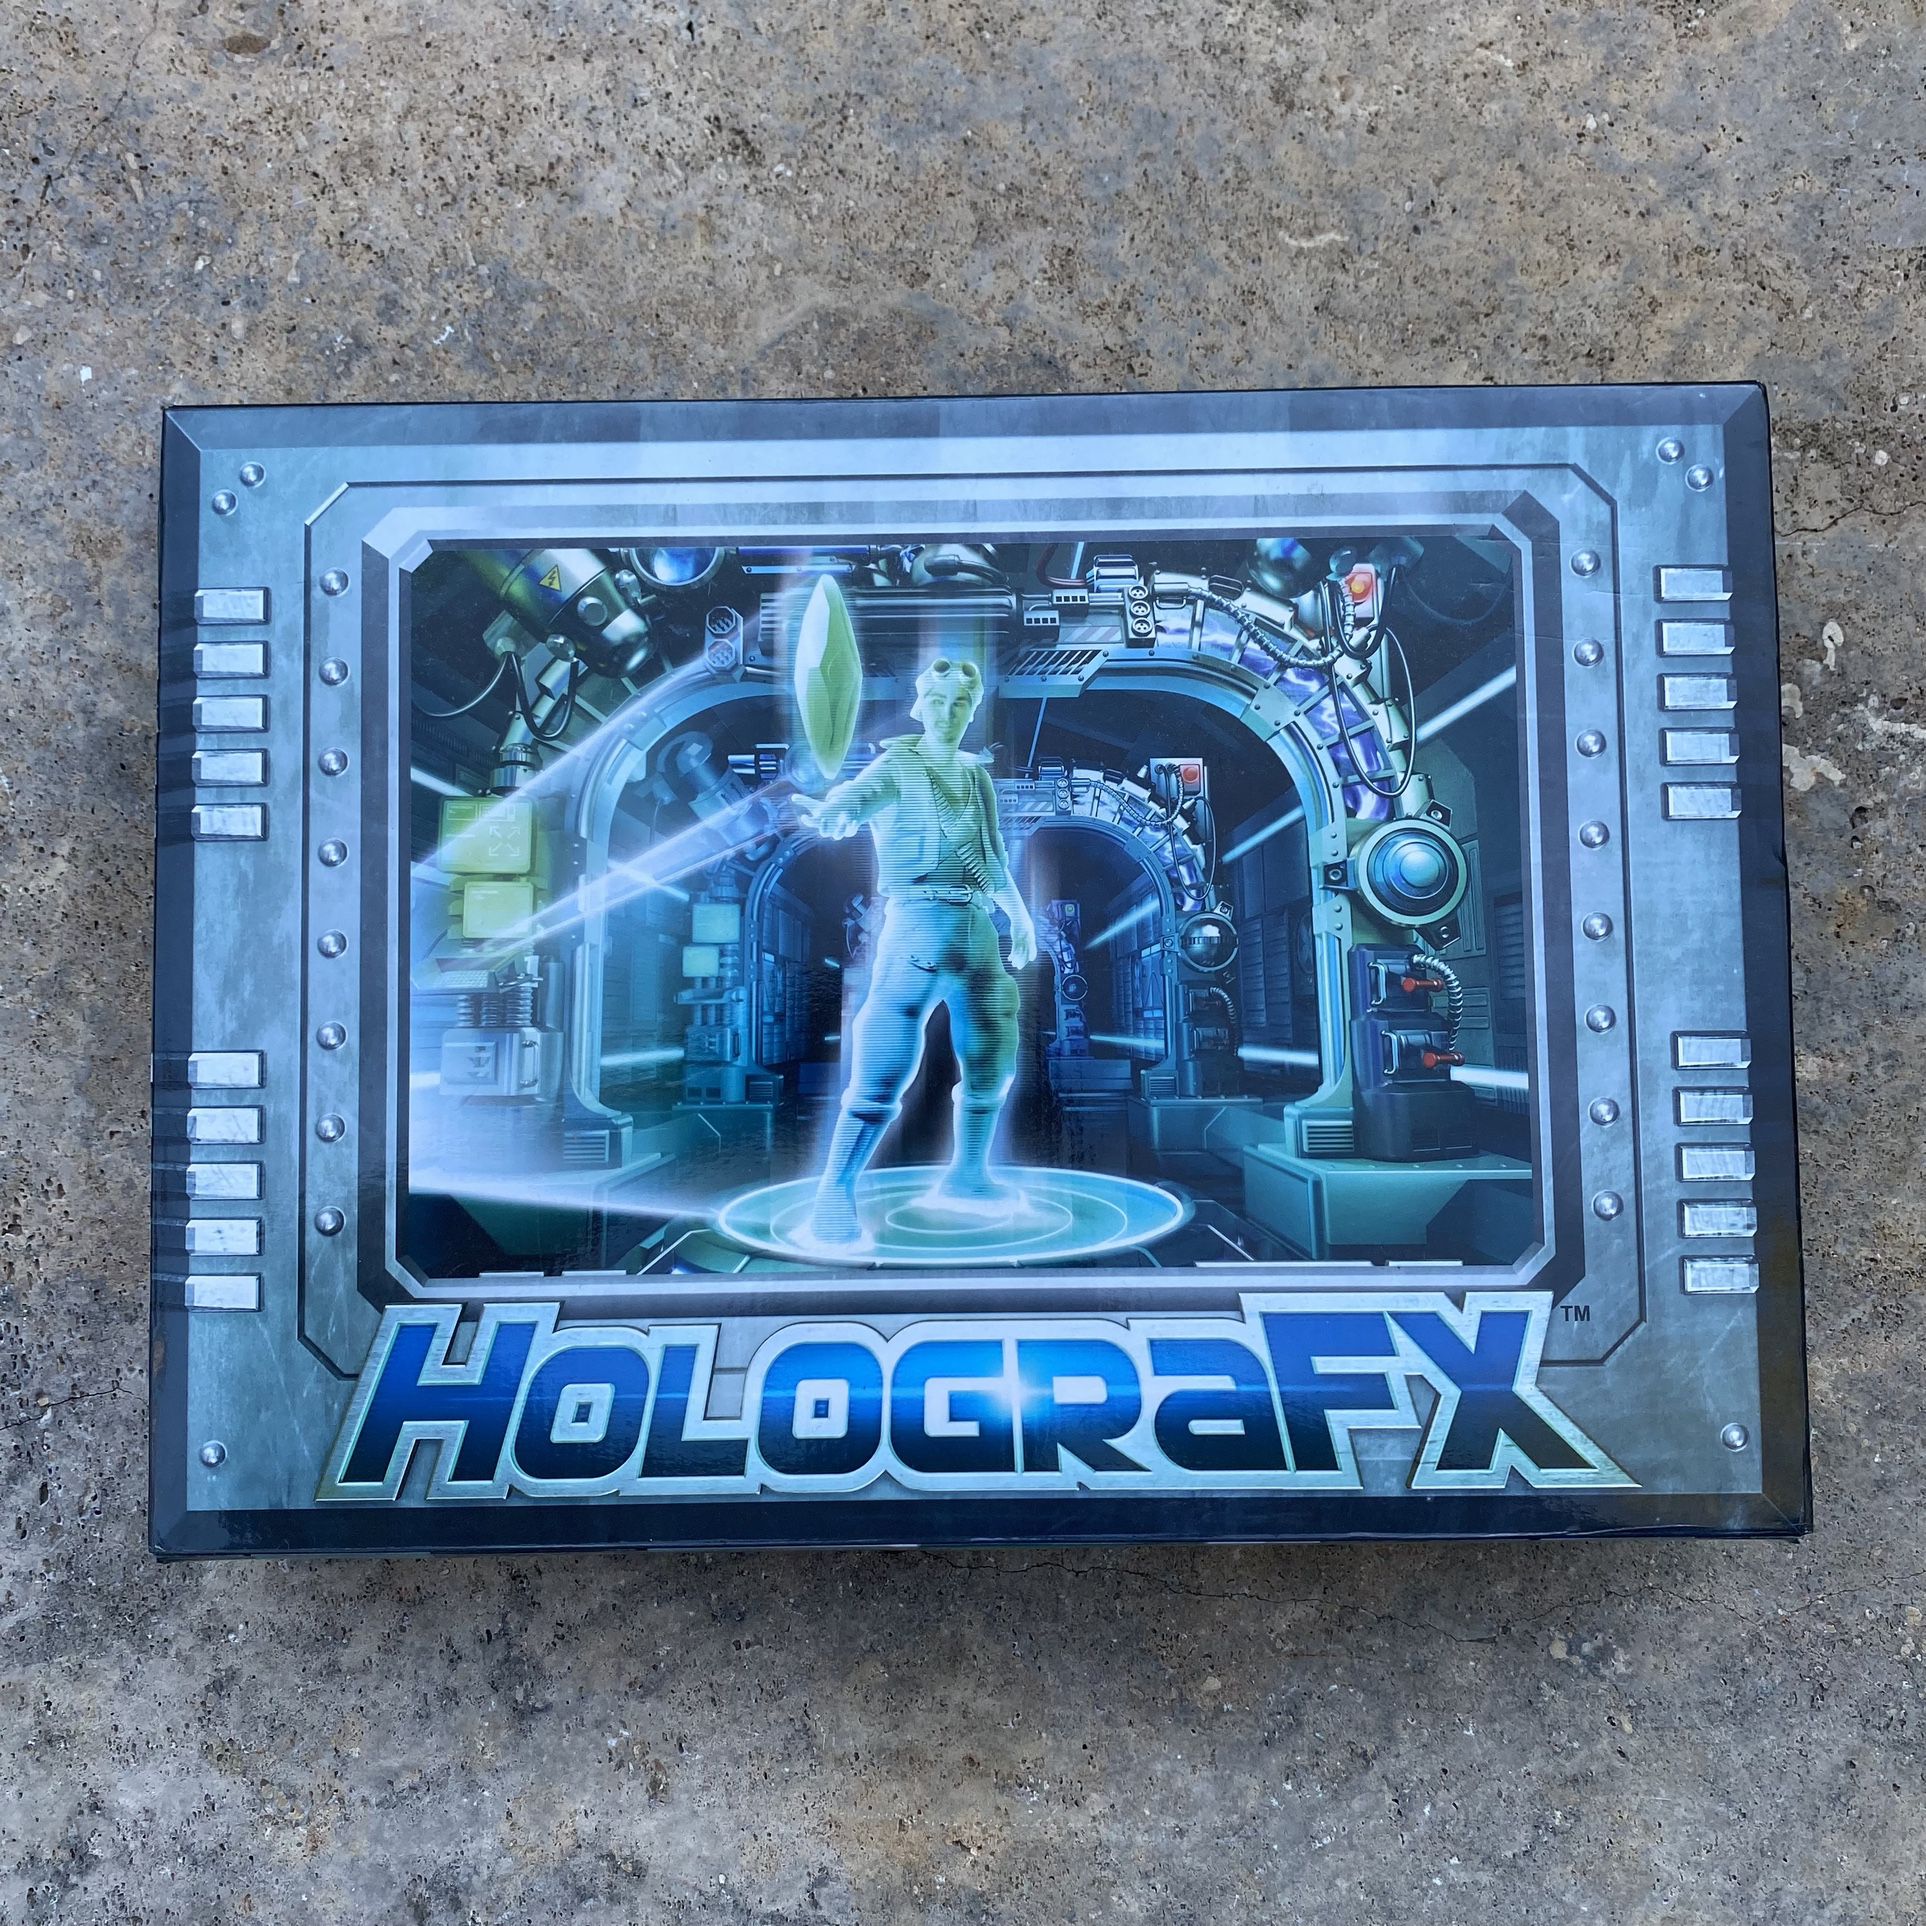 HolograFX Show Game New With All Parts